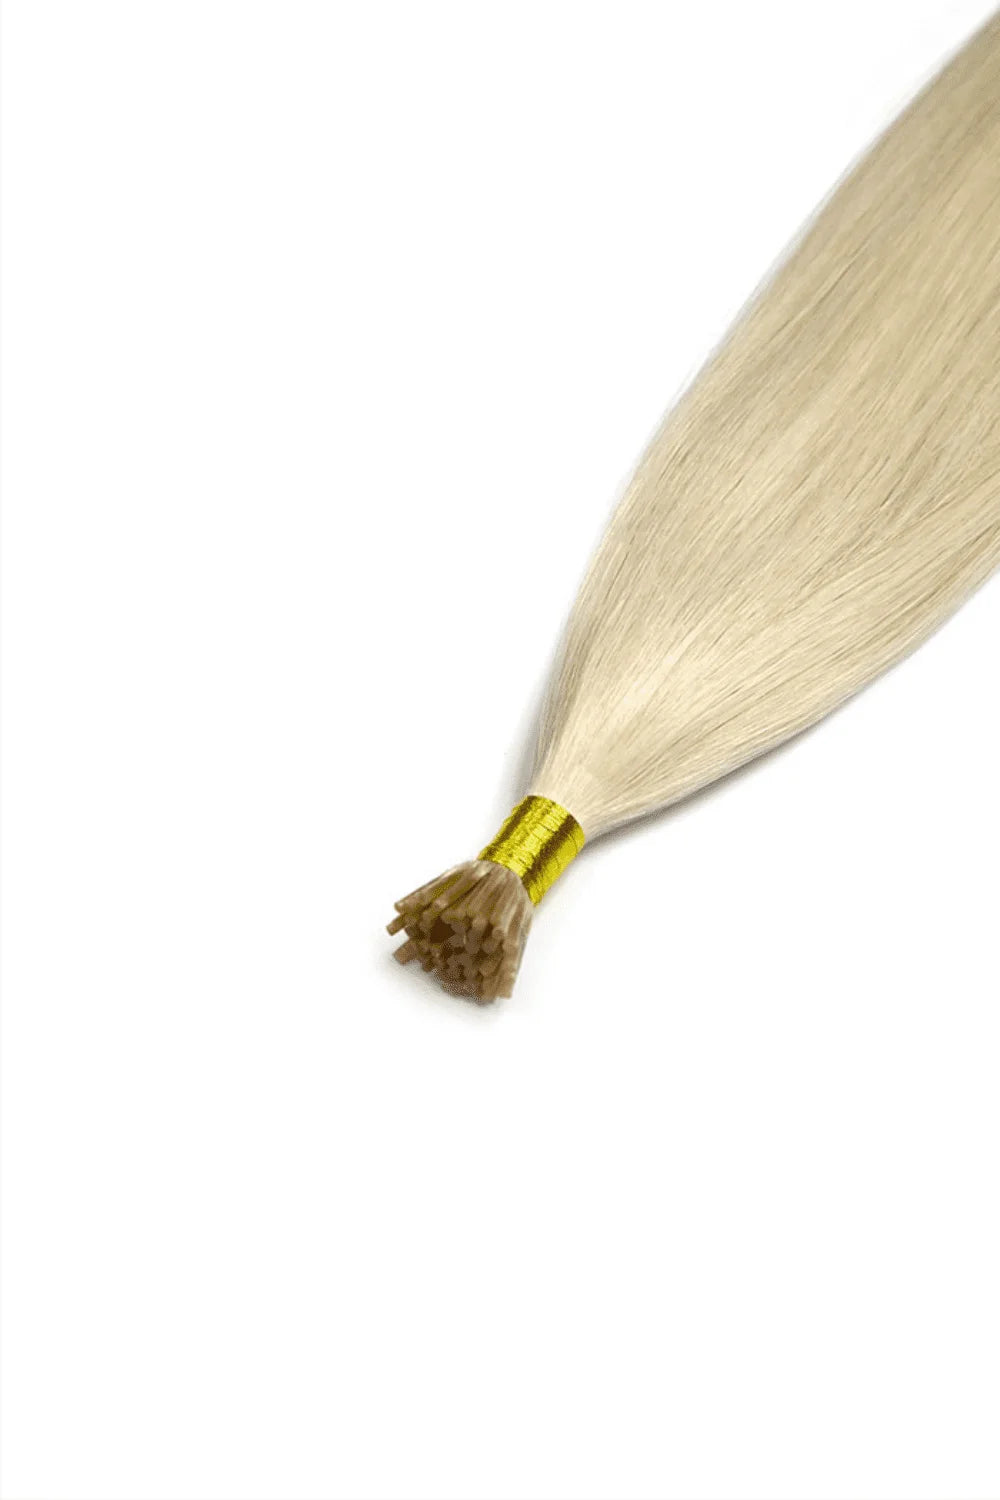 ice blonde remy royale i-tip hair extension